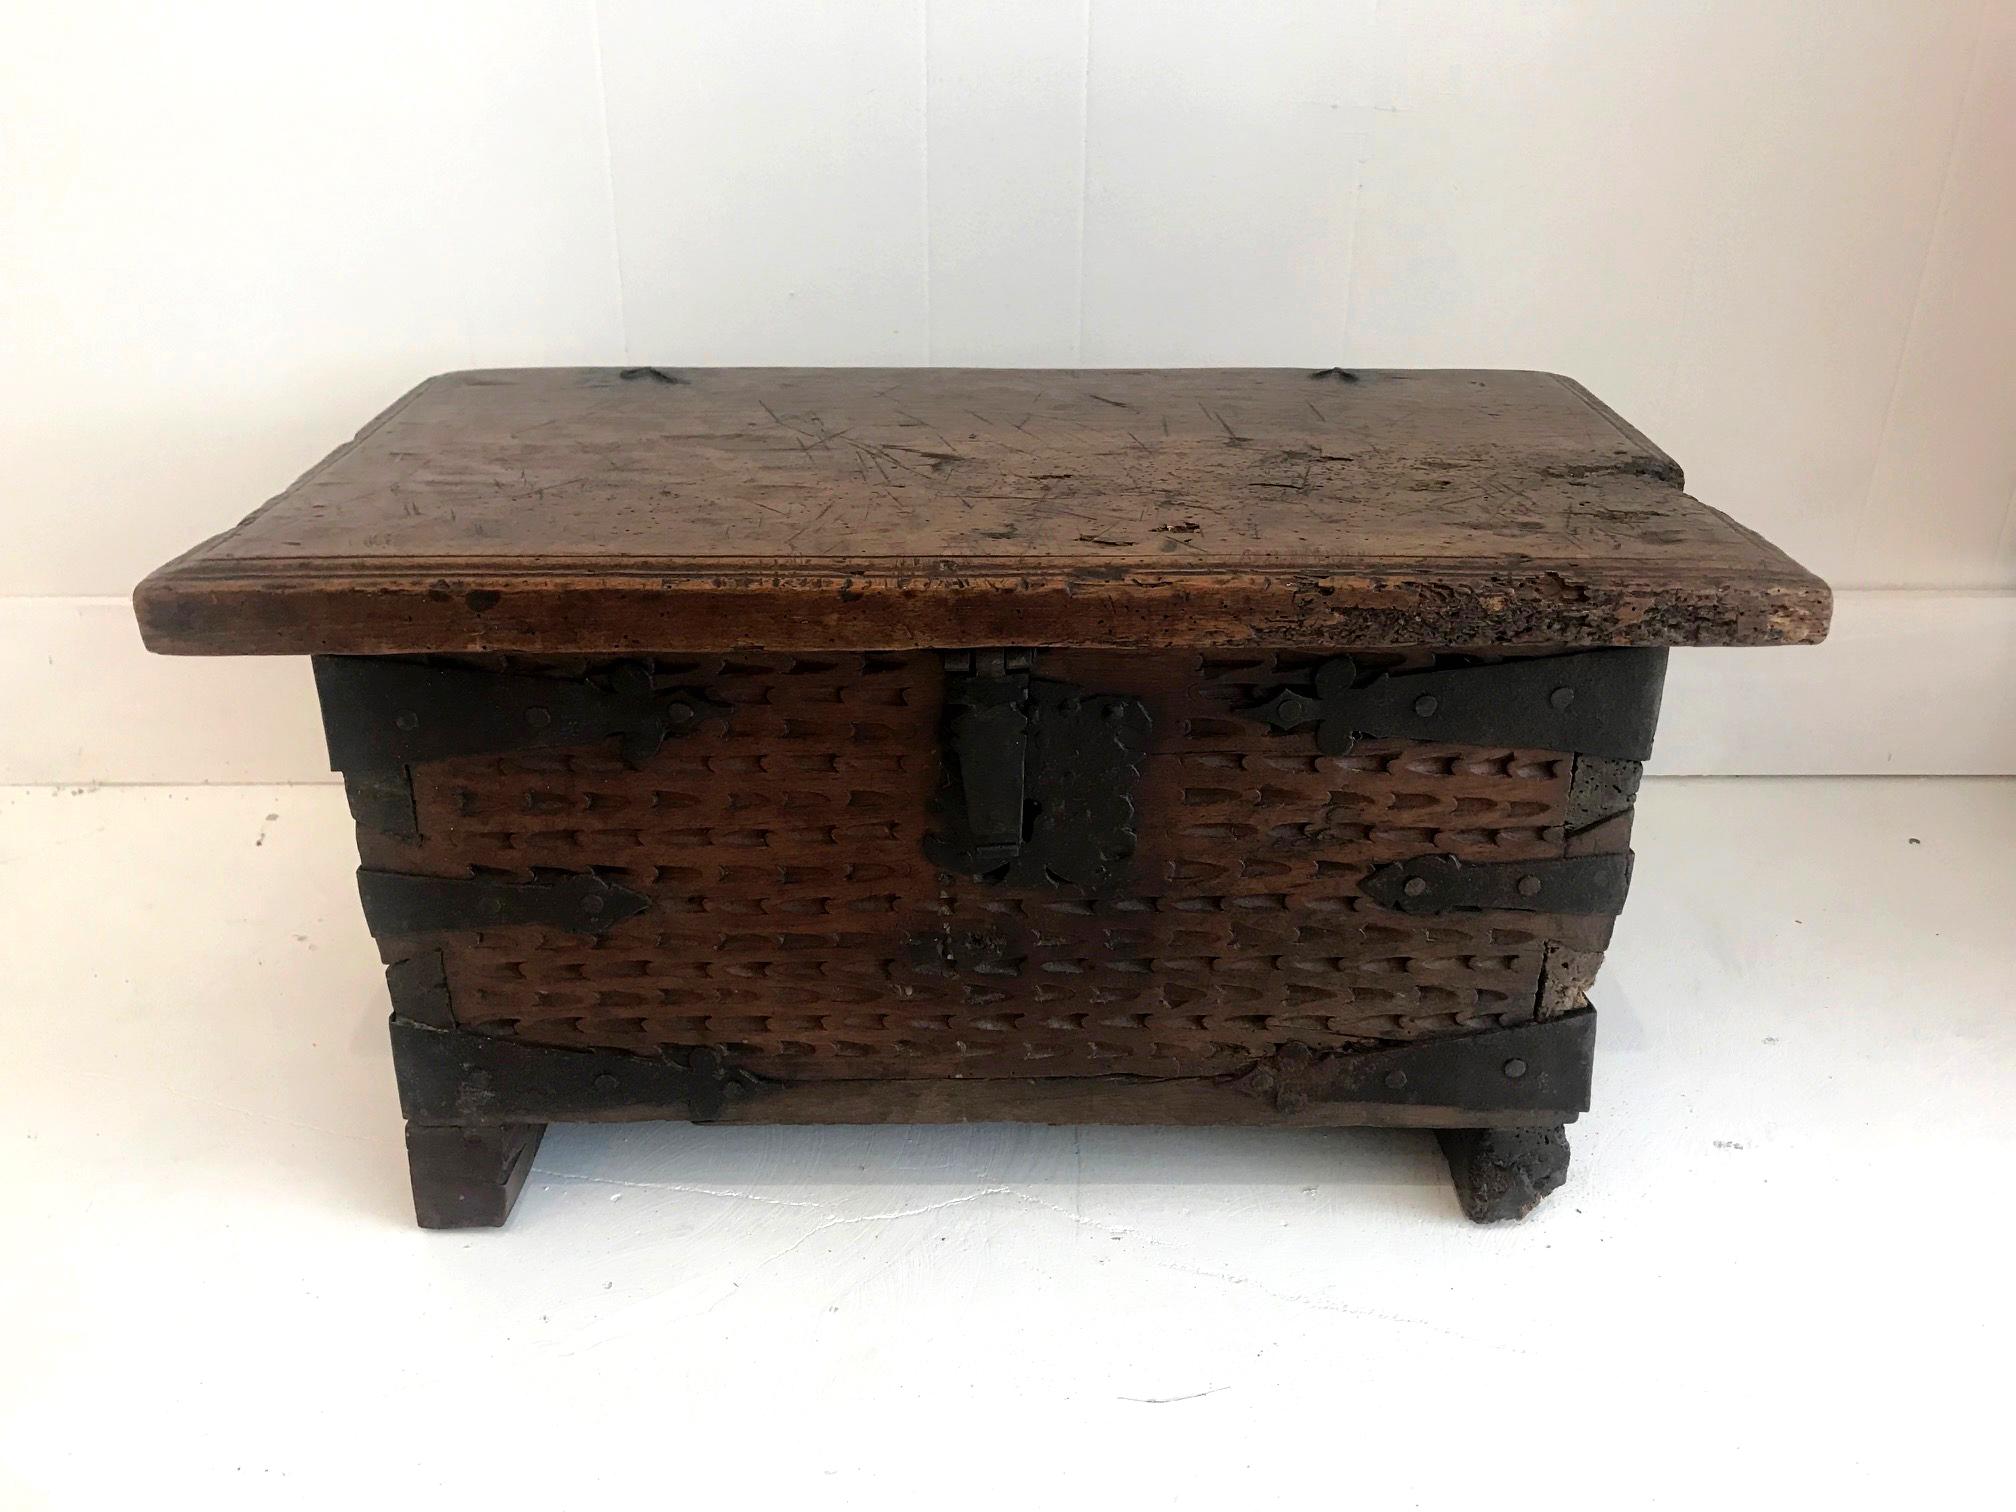 A small Spanish or Spanish Colonial trunk/coffer bench in carved walnut with large joinery, iron corner brackets and an iron strap lock, supported on a plinth base. The bench is likely dated to early 19th century. The carving was hand-chiselled in a